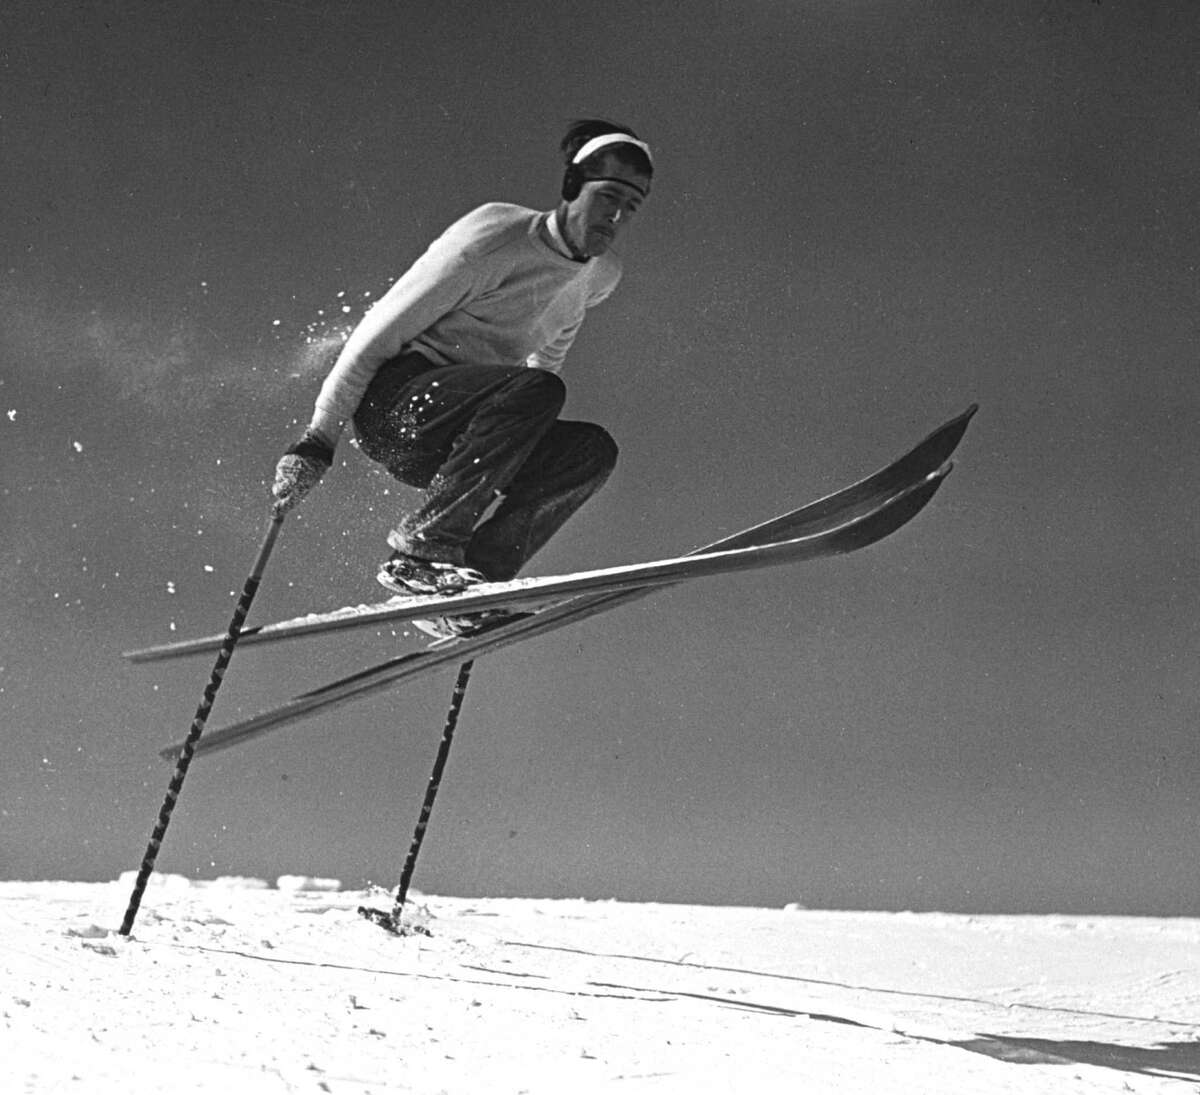 Skier in gelandesprung, a skiing jump performed in a crouching position with the use of both poles, 1936, in Lake Placid, N.Y. (New York State Archives)